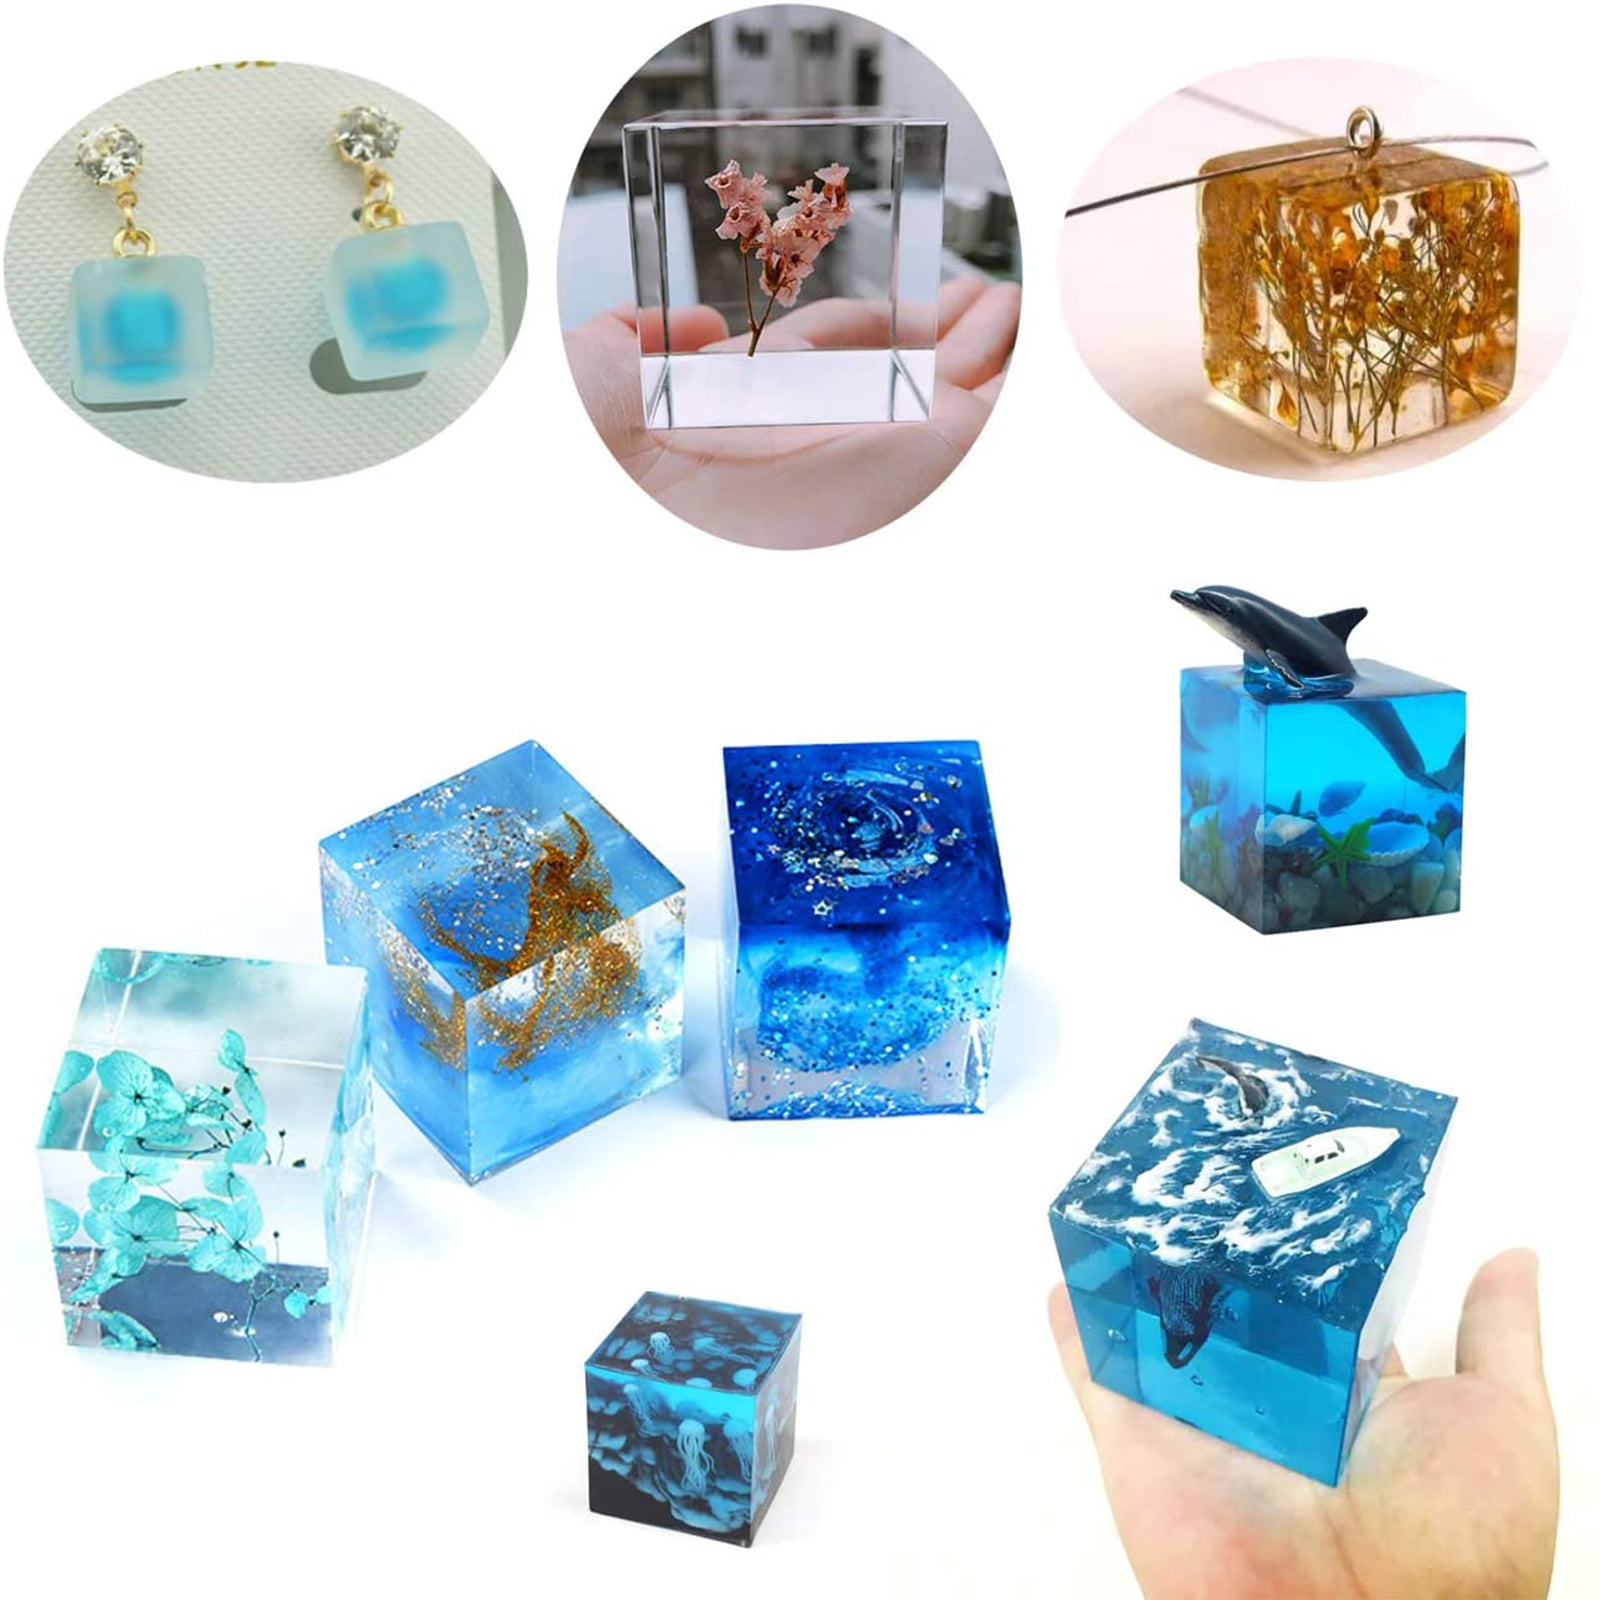 ANHTCZYX 9 Size Square Resin Silicone Molds,Cube Epoxy Resin Casting Mold Clear Cube Mold for DIY Art Crafts Home Decorations, Size: Small, 9mm